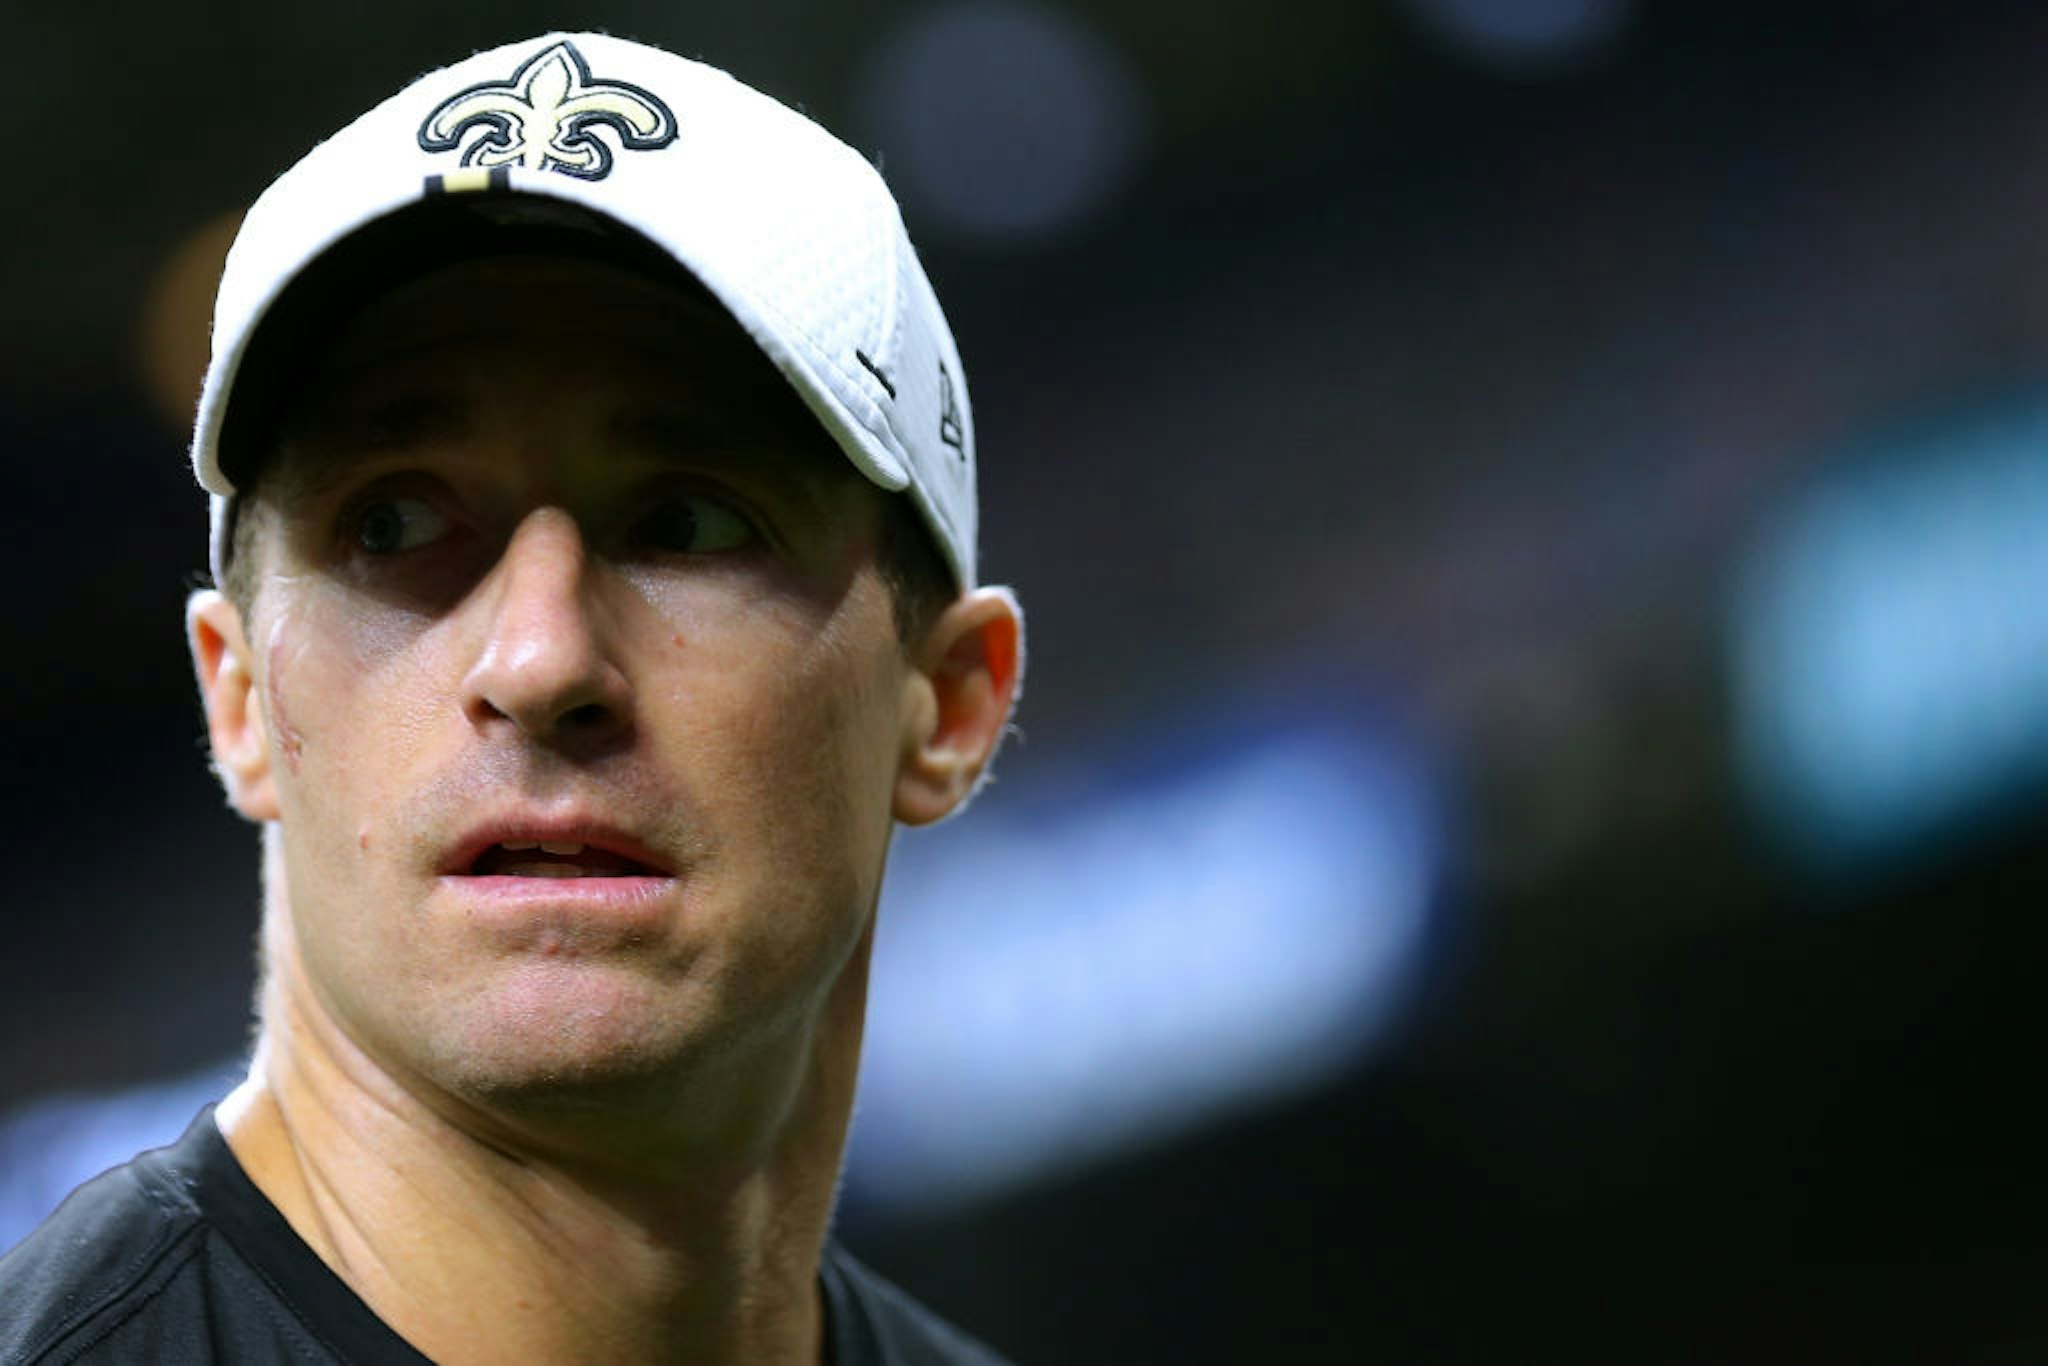 Drew Brees #9 of the New Orleans Saints during a preseason game at the Mercedes Benz Superdome on August 09, 2019 in New Orleans, Louisiana.